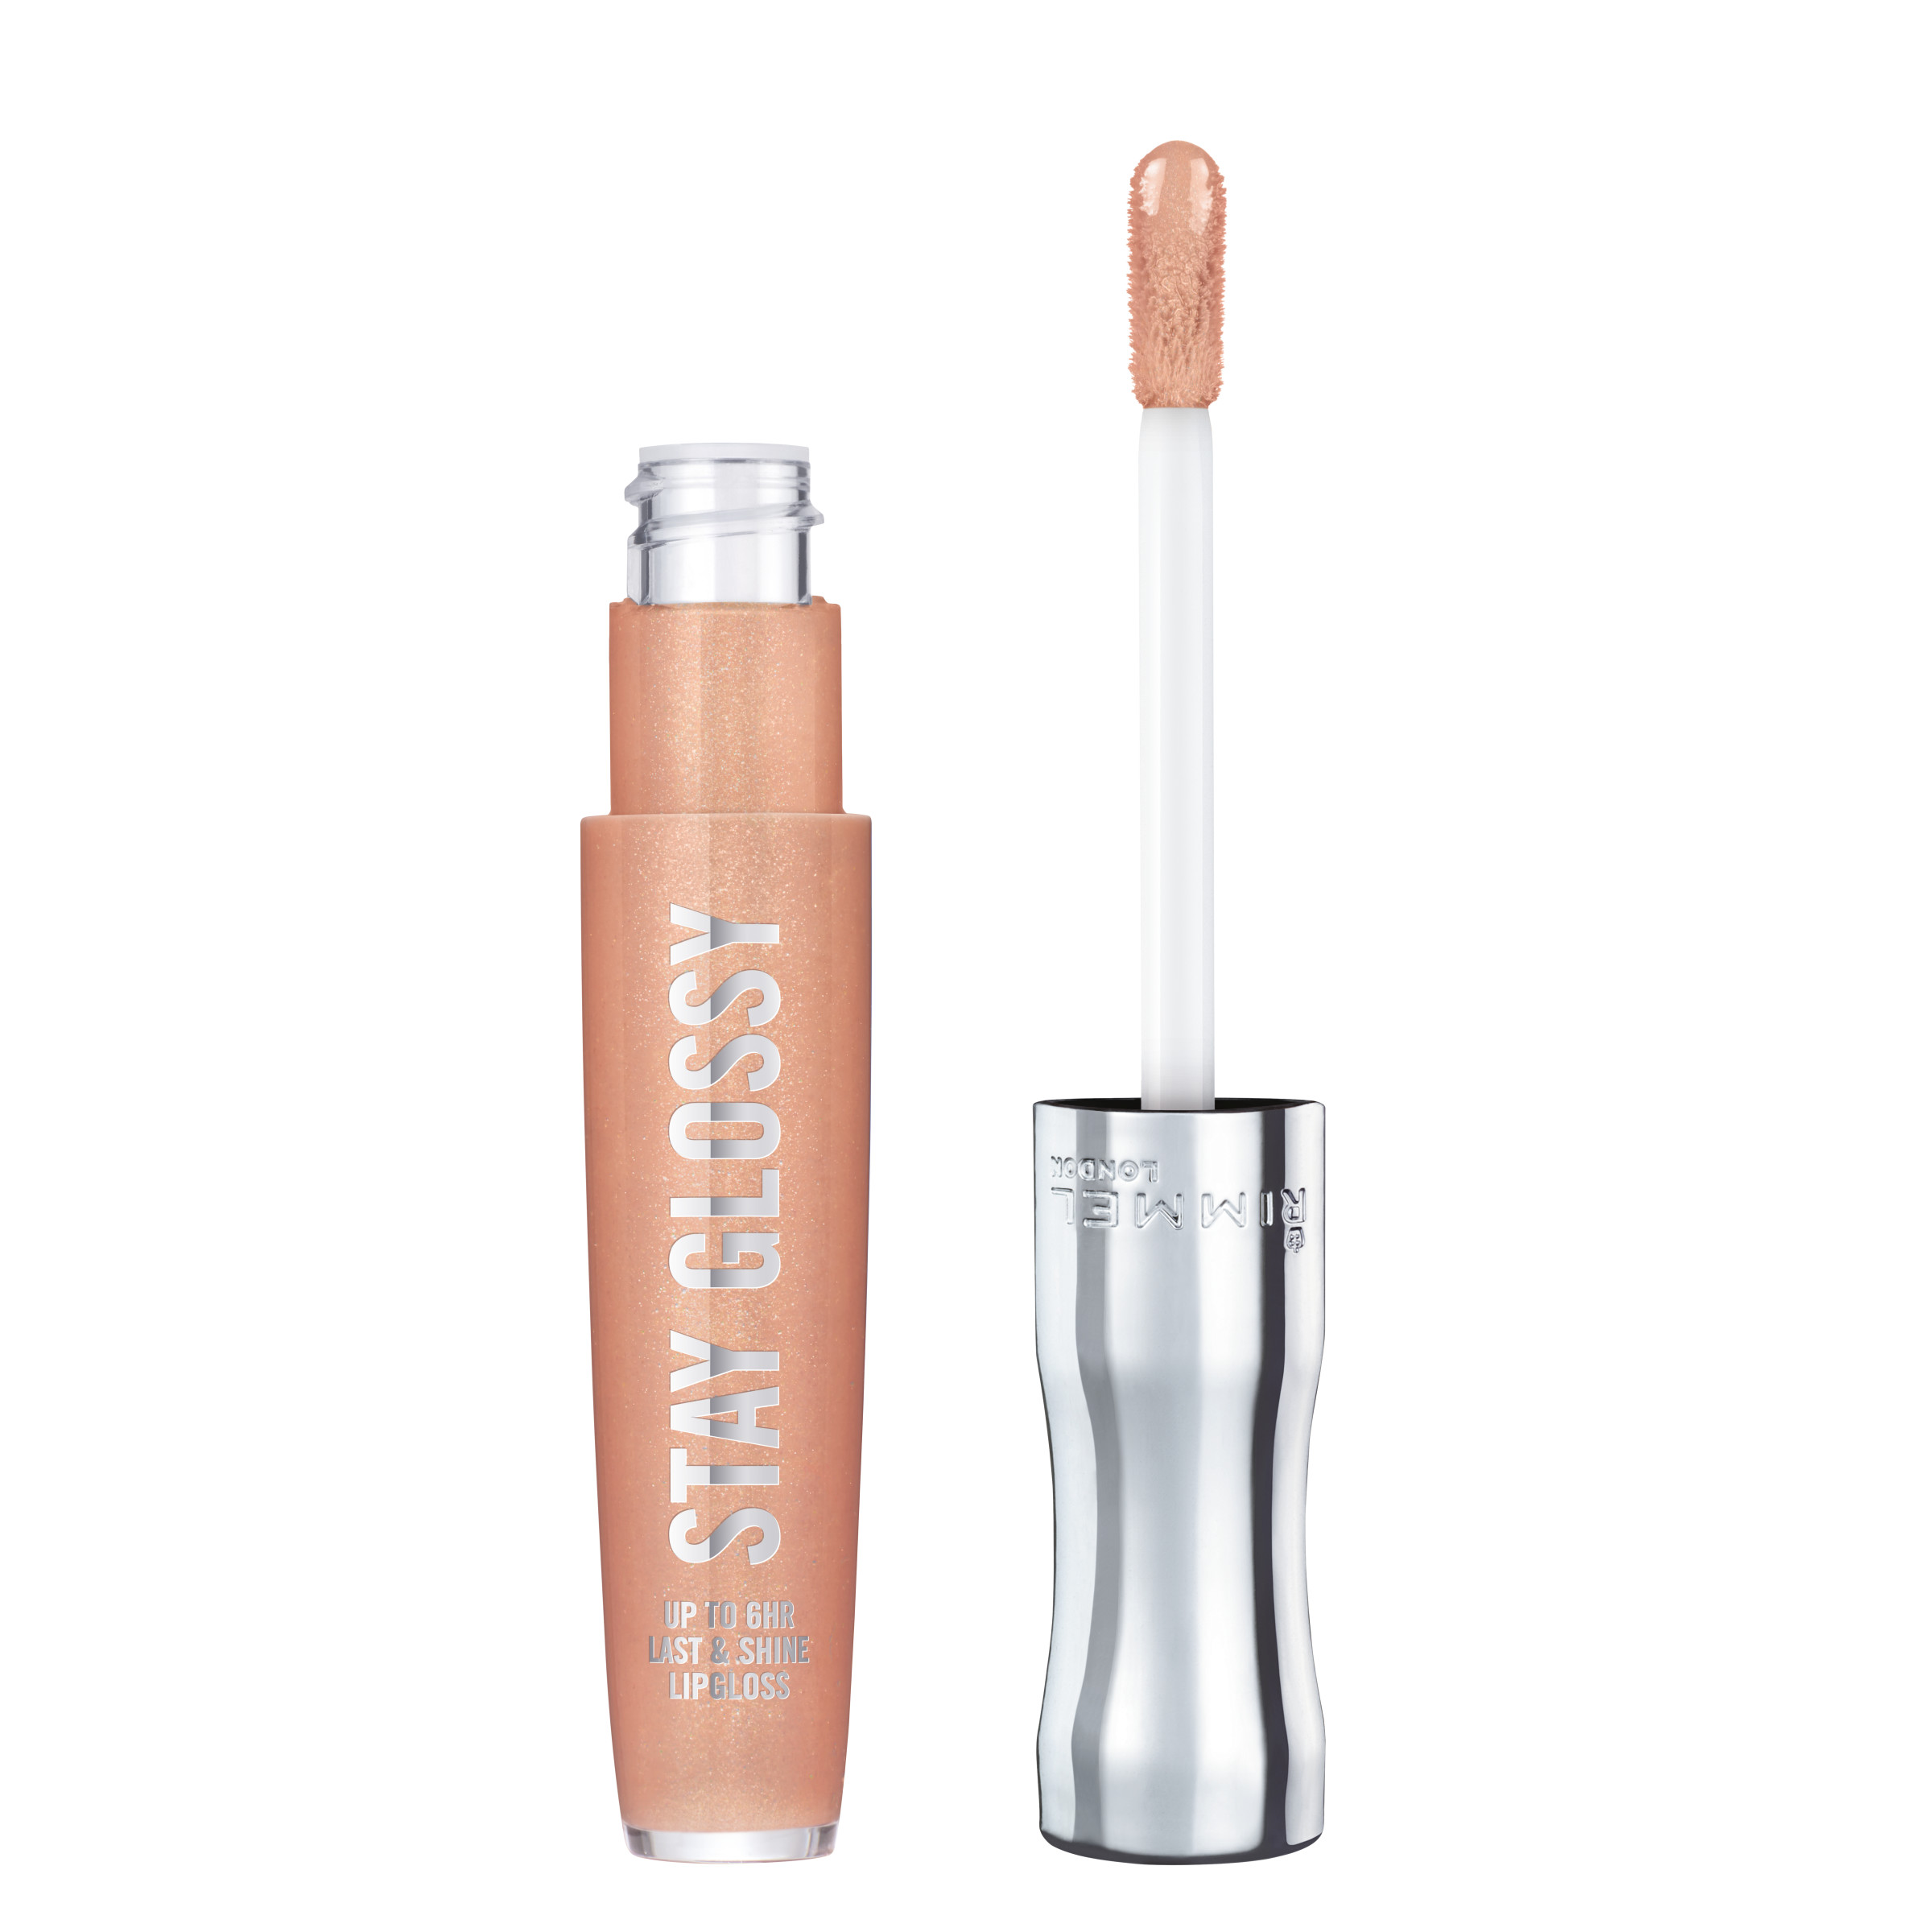 Rimmel Stay Glossy Lip Gloss, Non-Stop Glamour, 0.18 oz - image 1 of 10